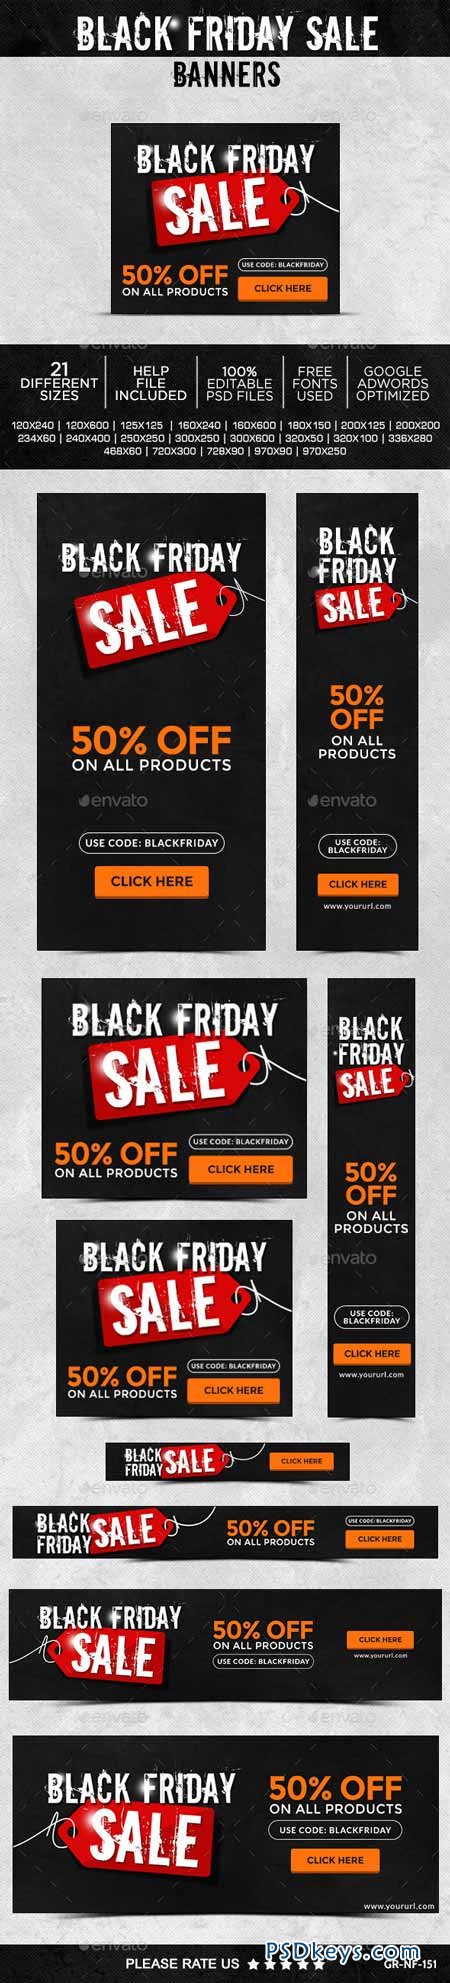 Black Friday Sale Banners 9541601